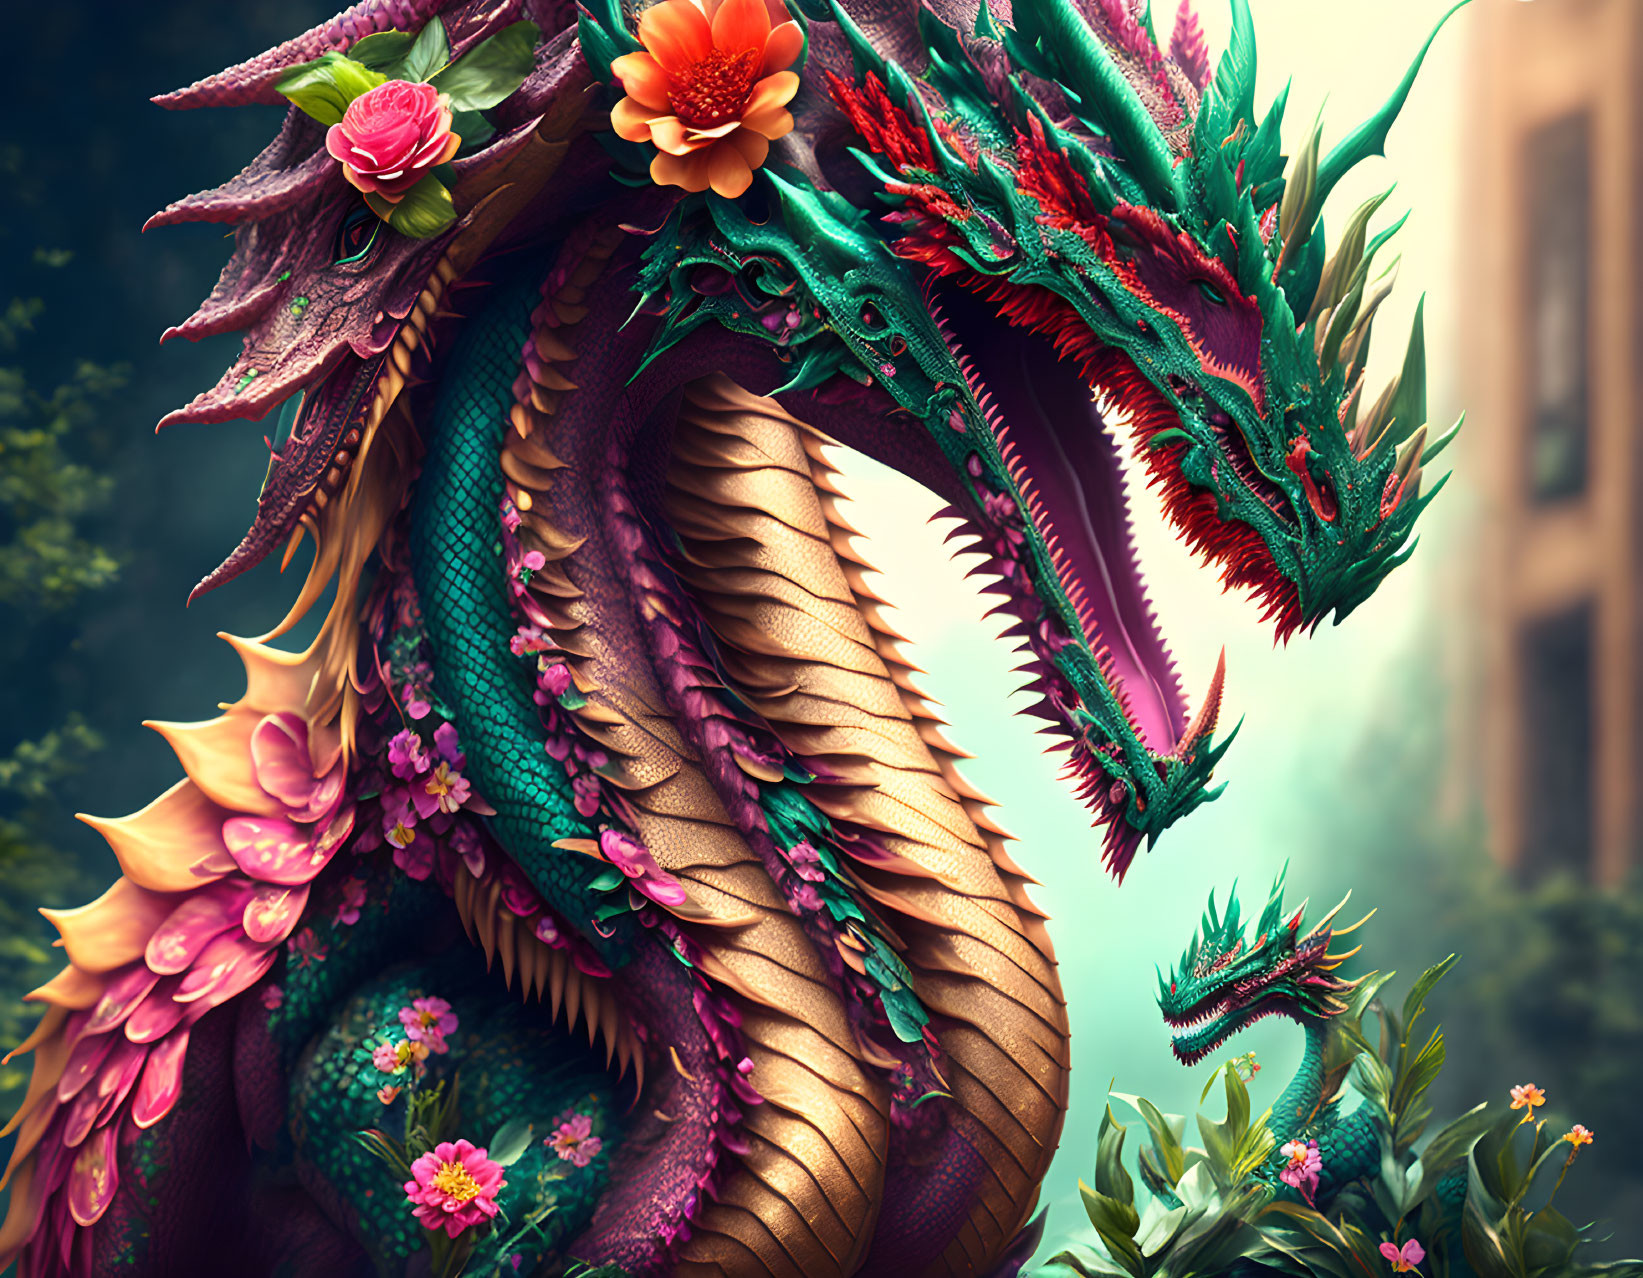 A dragon of flowers